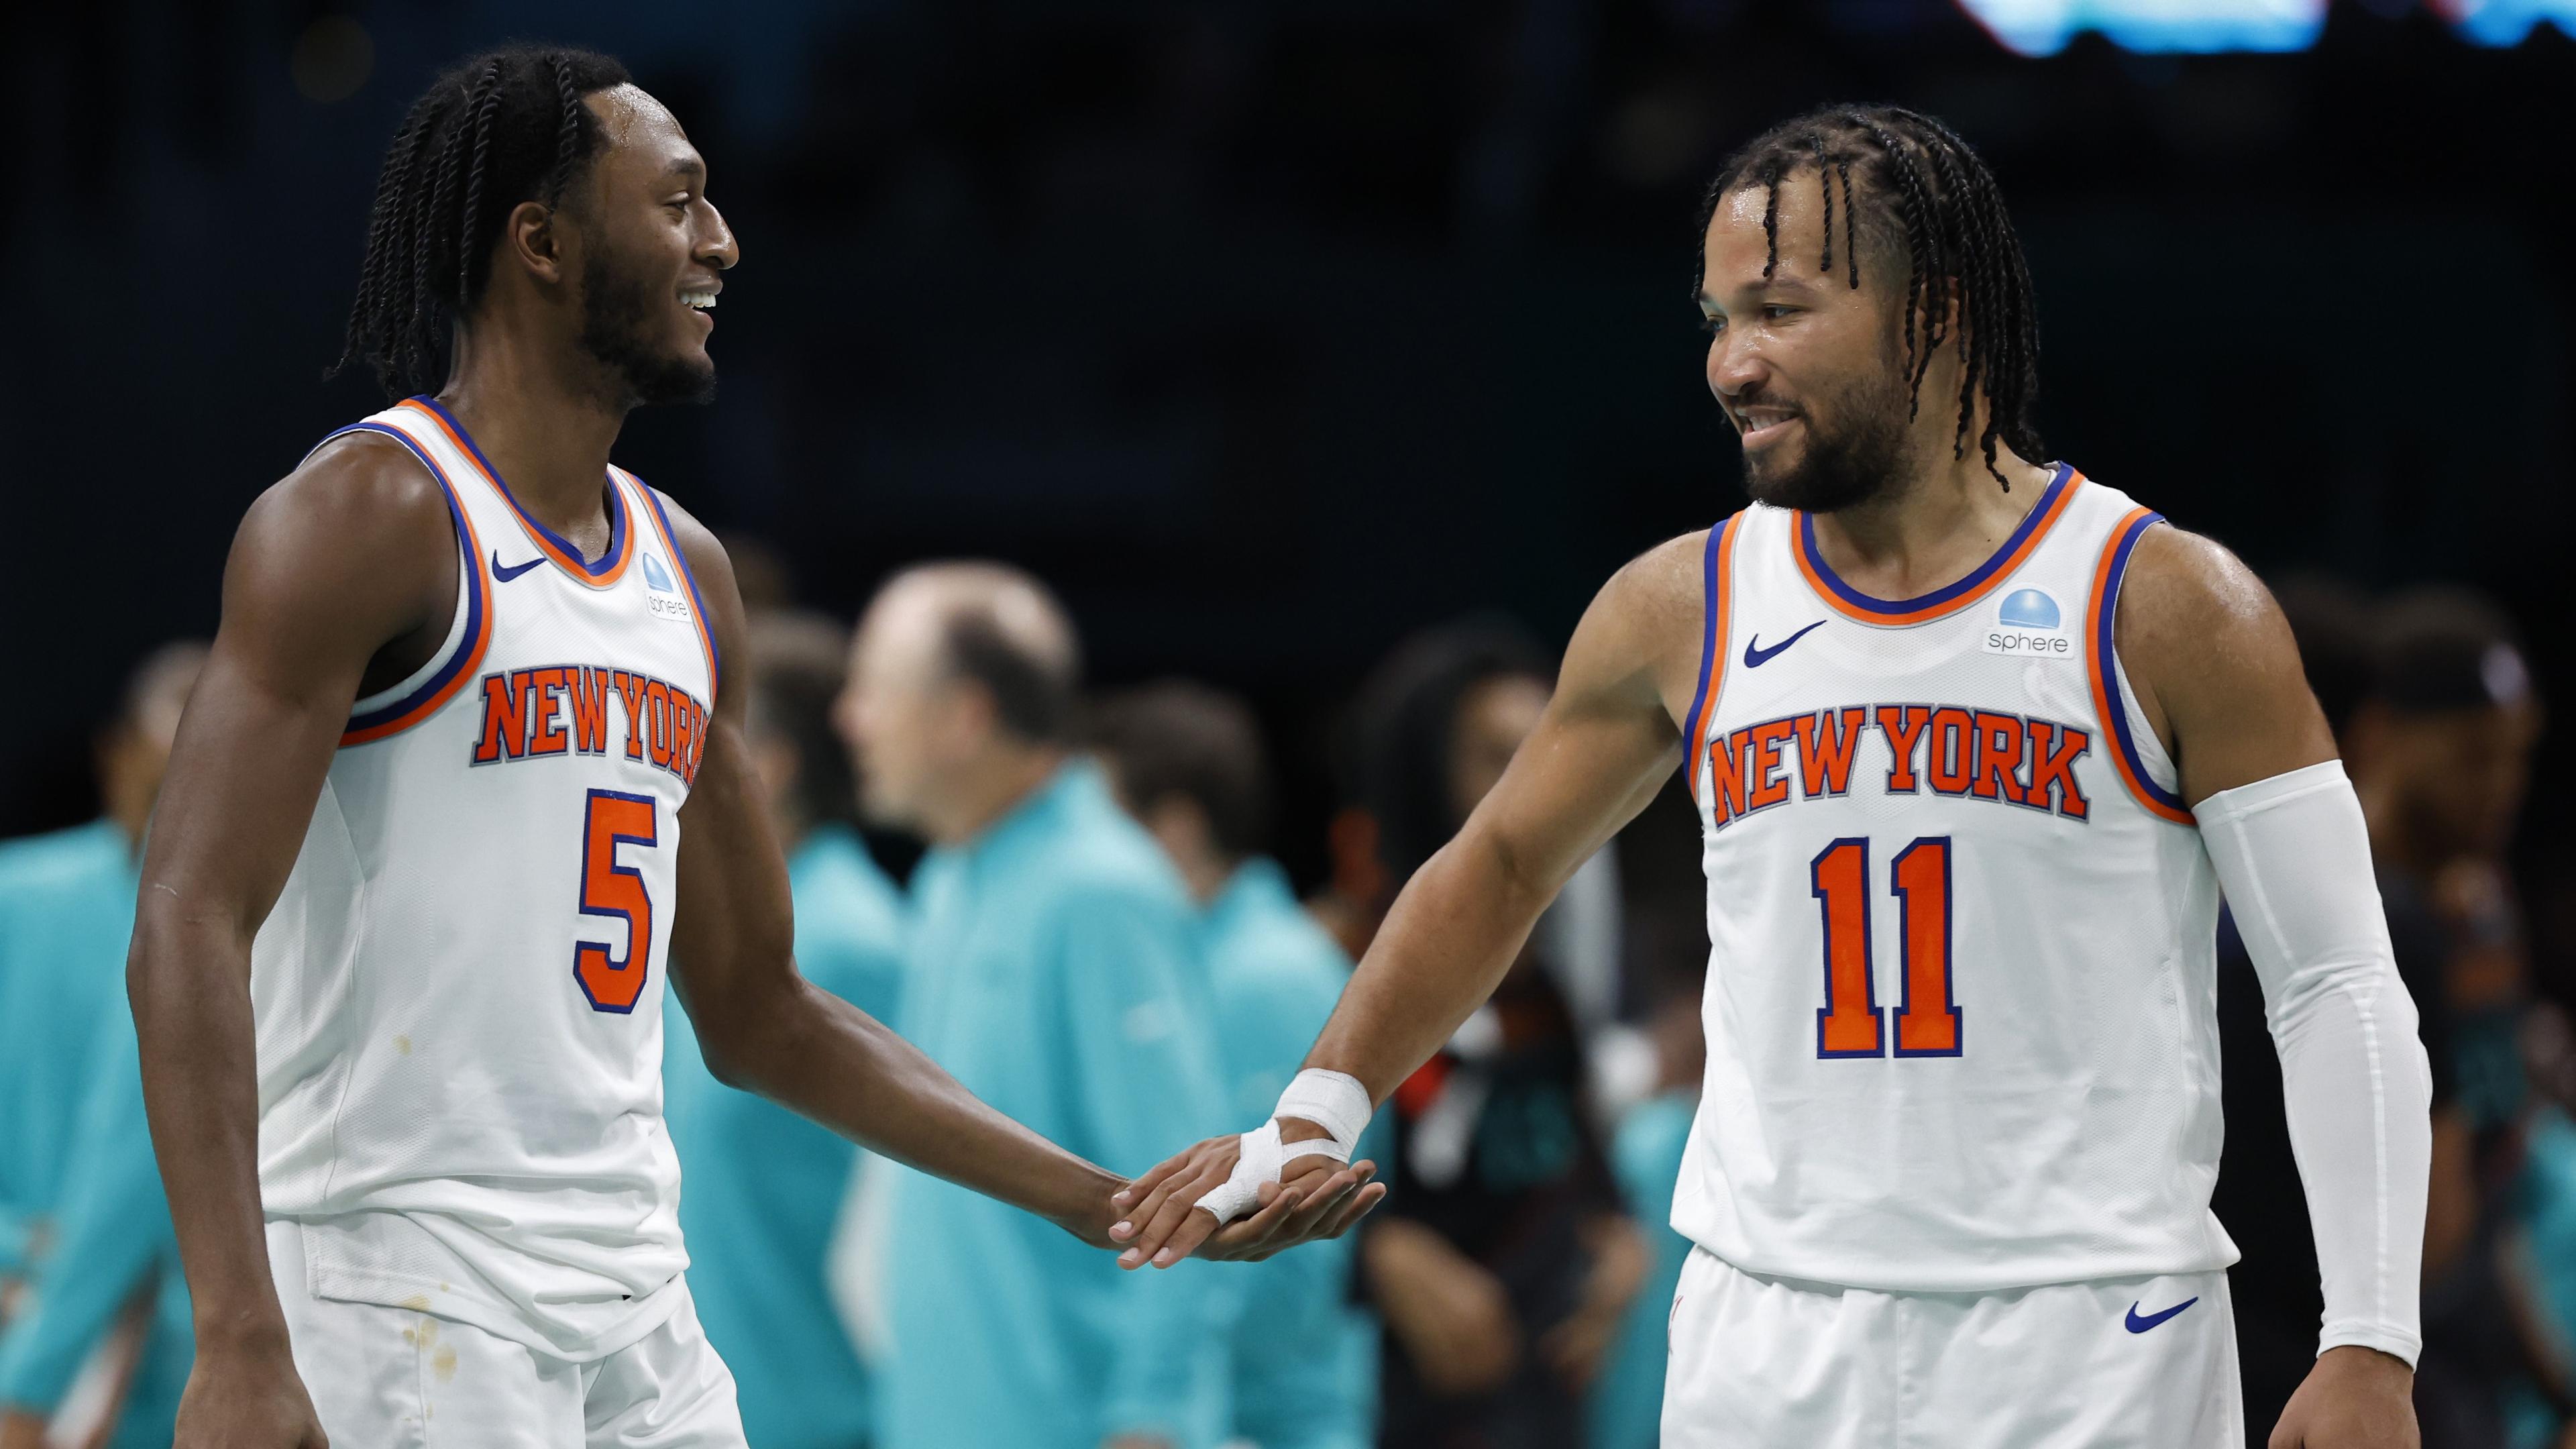 Nov 17, 2023; Washington, District of Columbia, USA; New York Knicks guard Immanuel Quickley (5) celebrates with Knicks guard Jalen Brunson (11) against the Washington Wizards in the fourth quarter at Capital One Arena. Mandatory Credit: Geoff Burke-USA TODAY Sports / © Geoff Burke-USA TODAY Sports